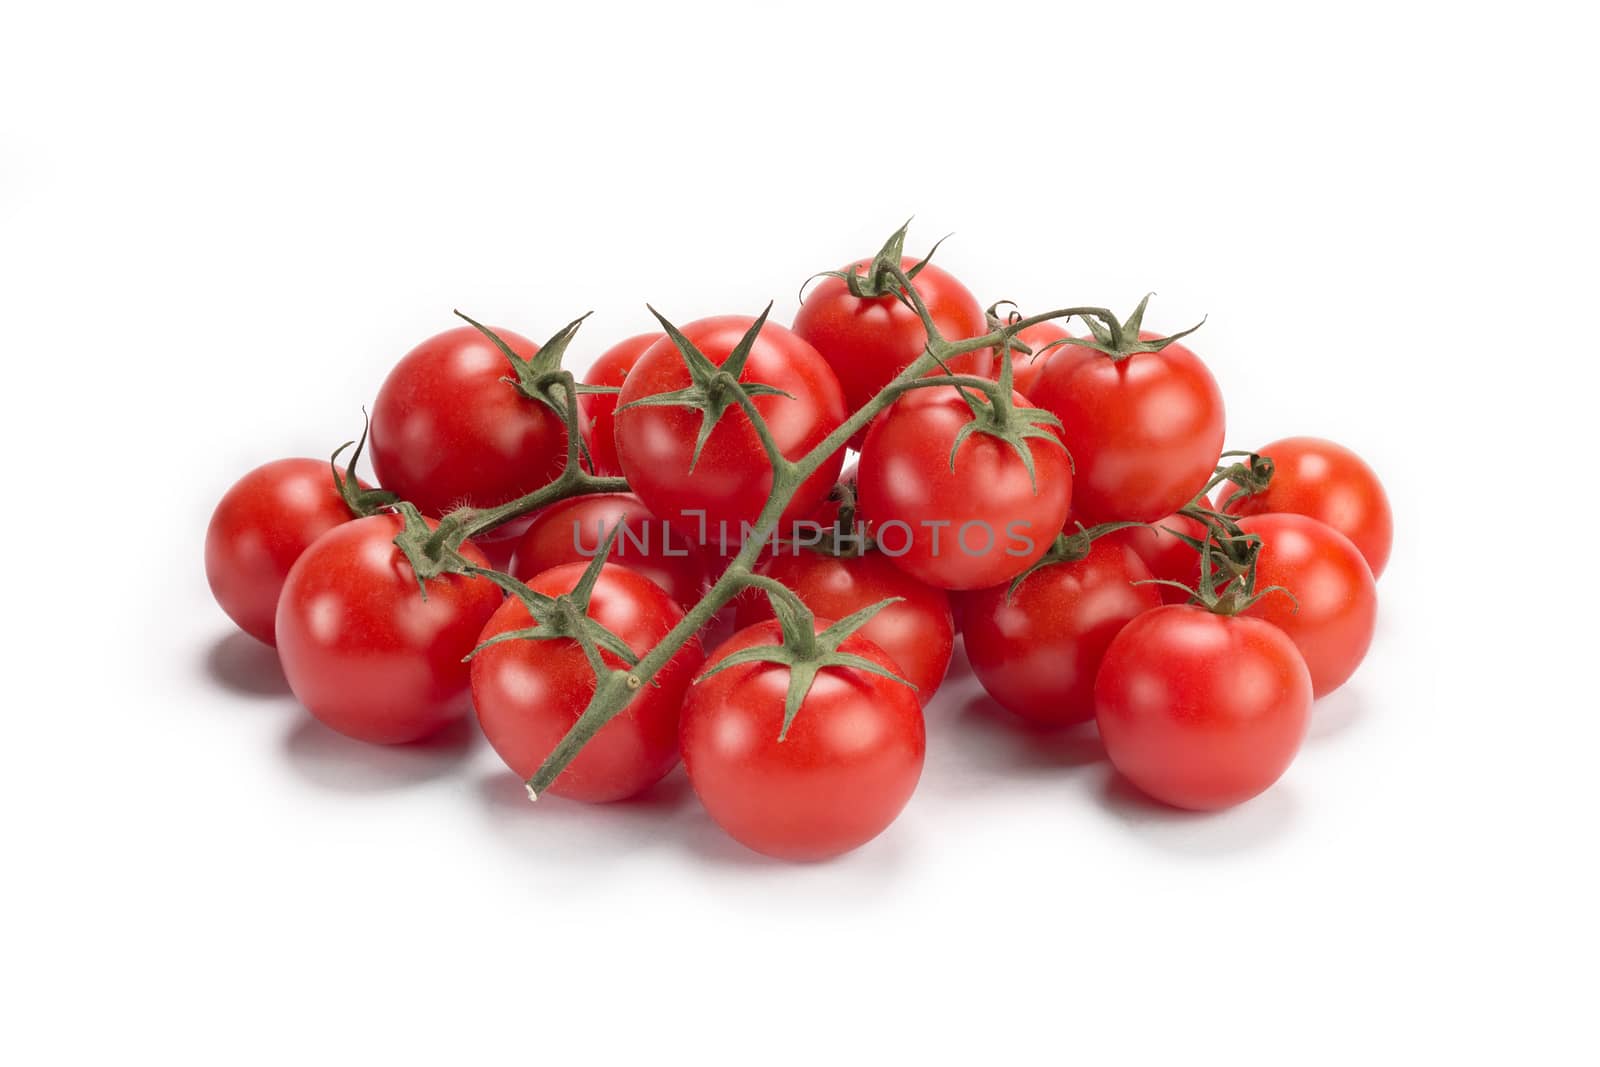 Cherry tomatoes on white background, isolated on white